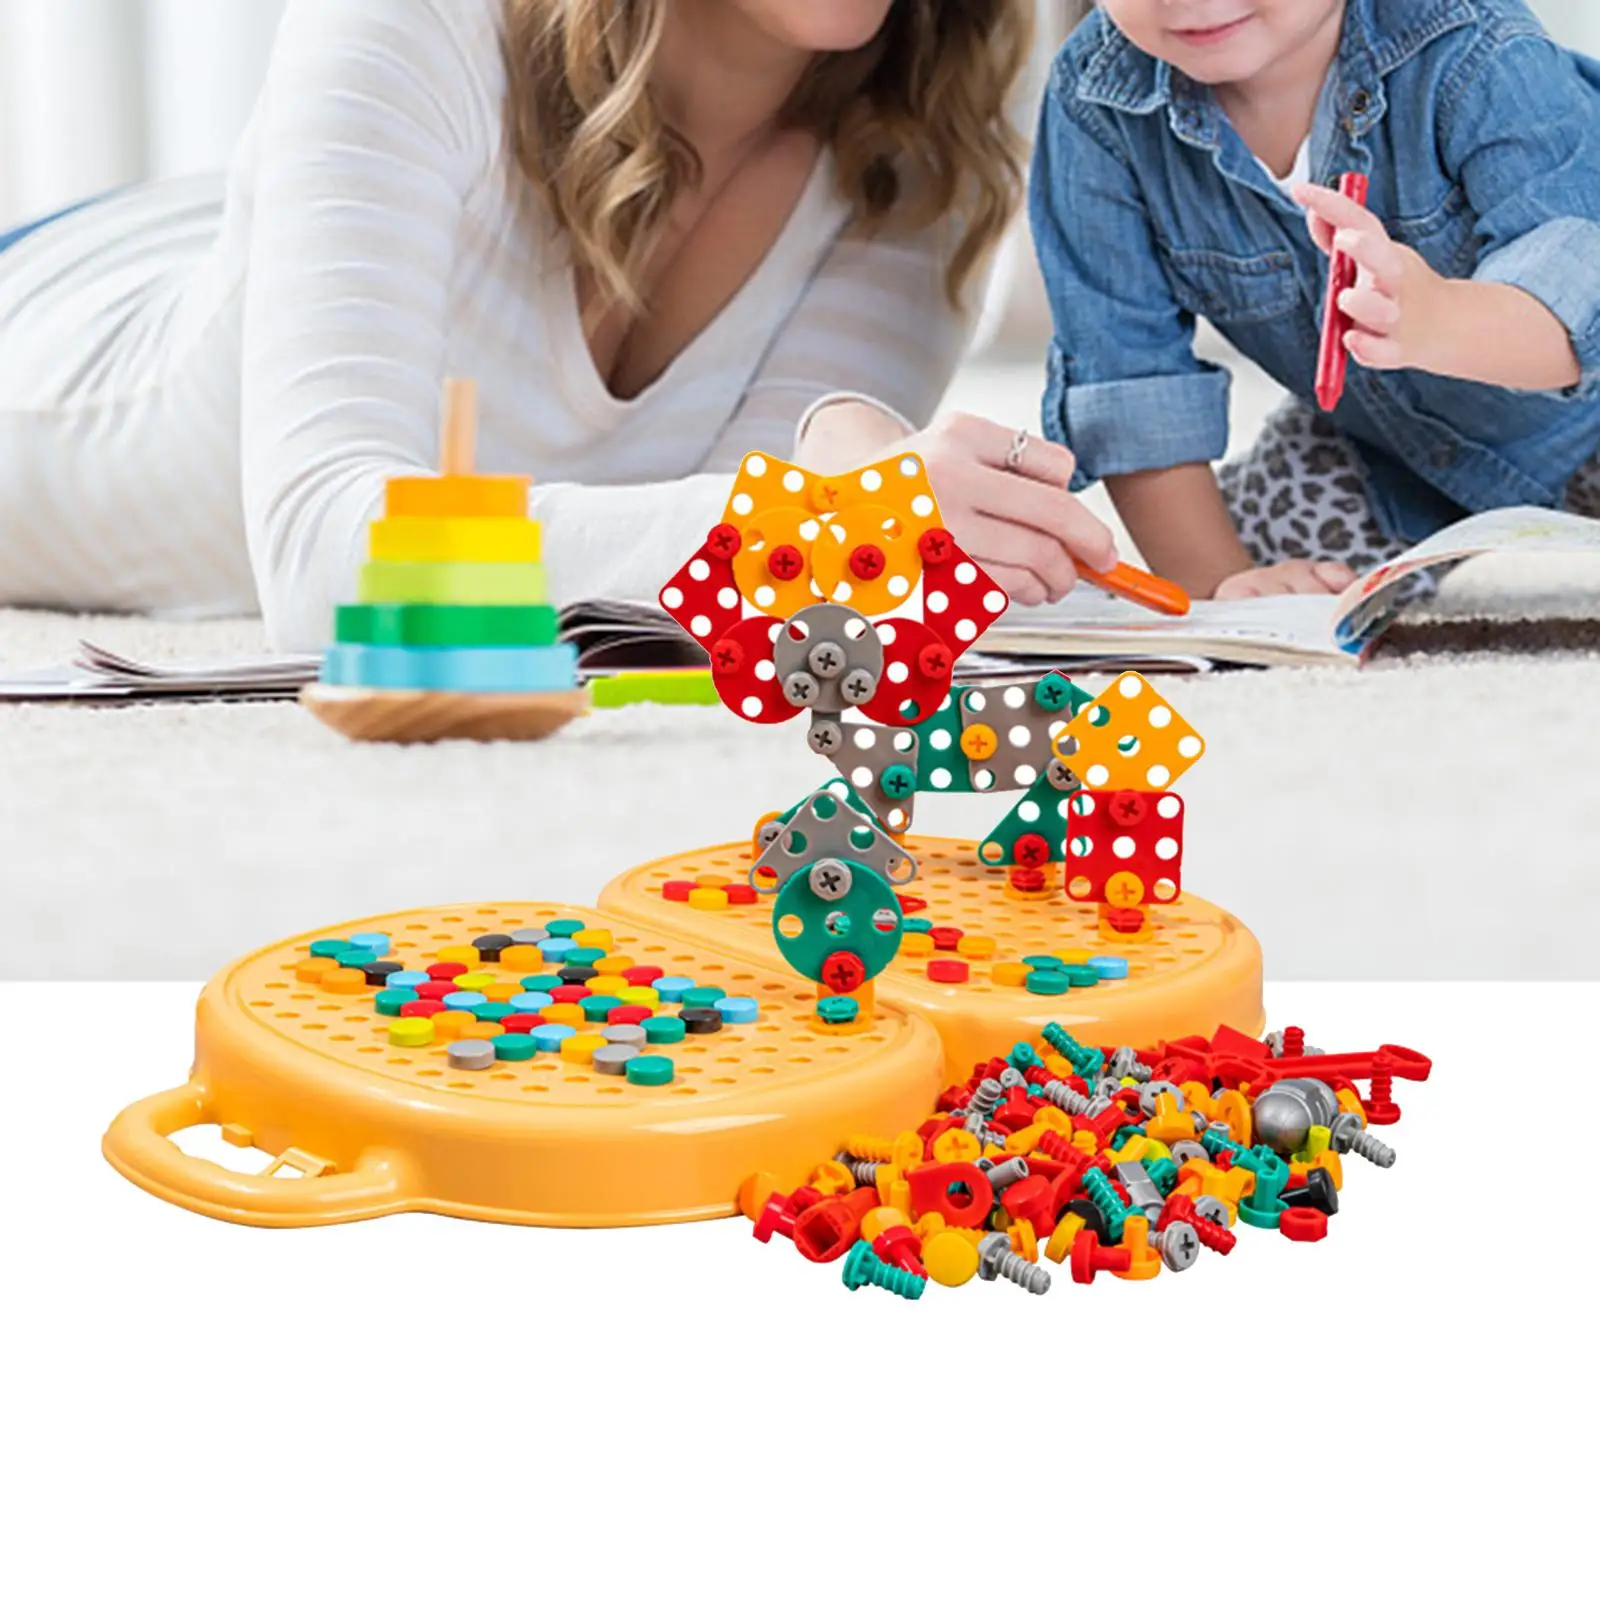 Simulation Building Toys Puzzle Toys Building Blocks Set Games Activity Center DIY Assembly Screw Toy for Children Gifts